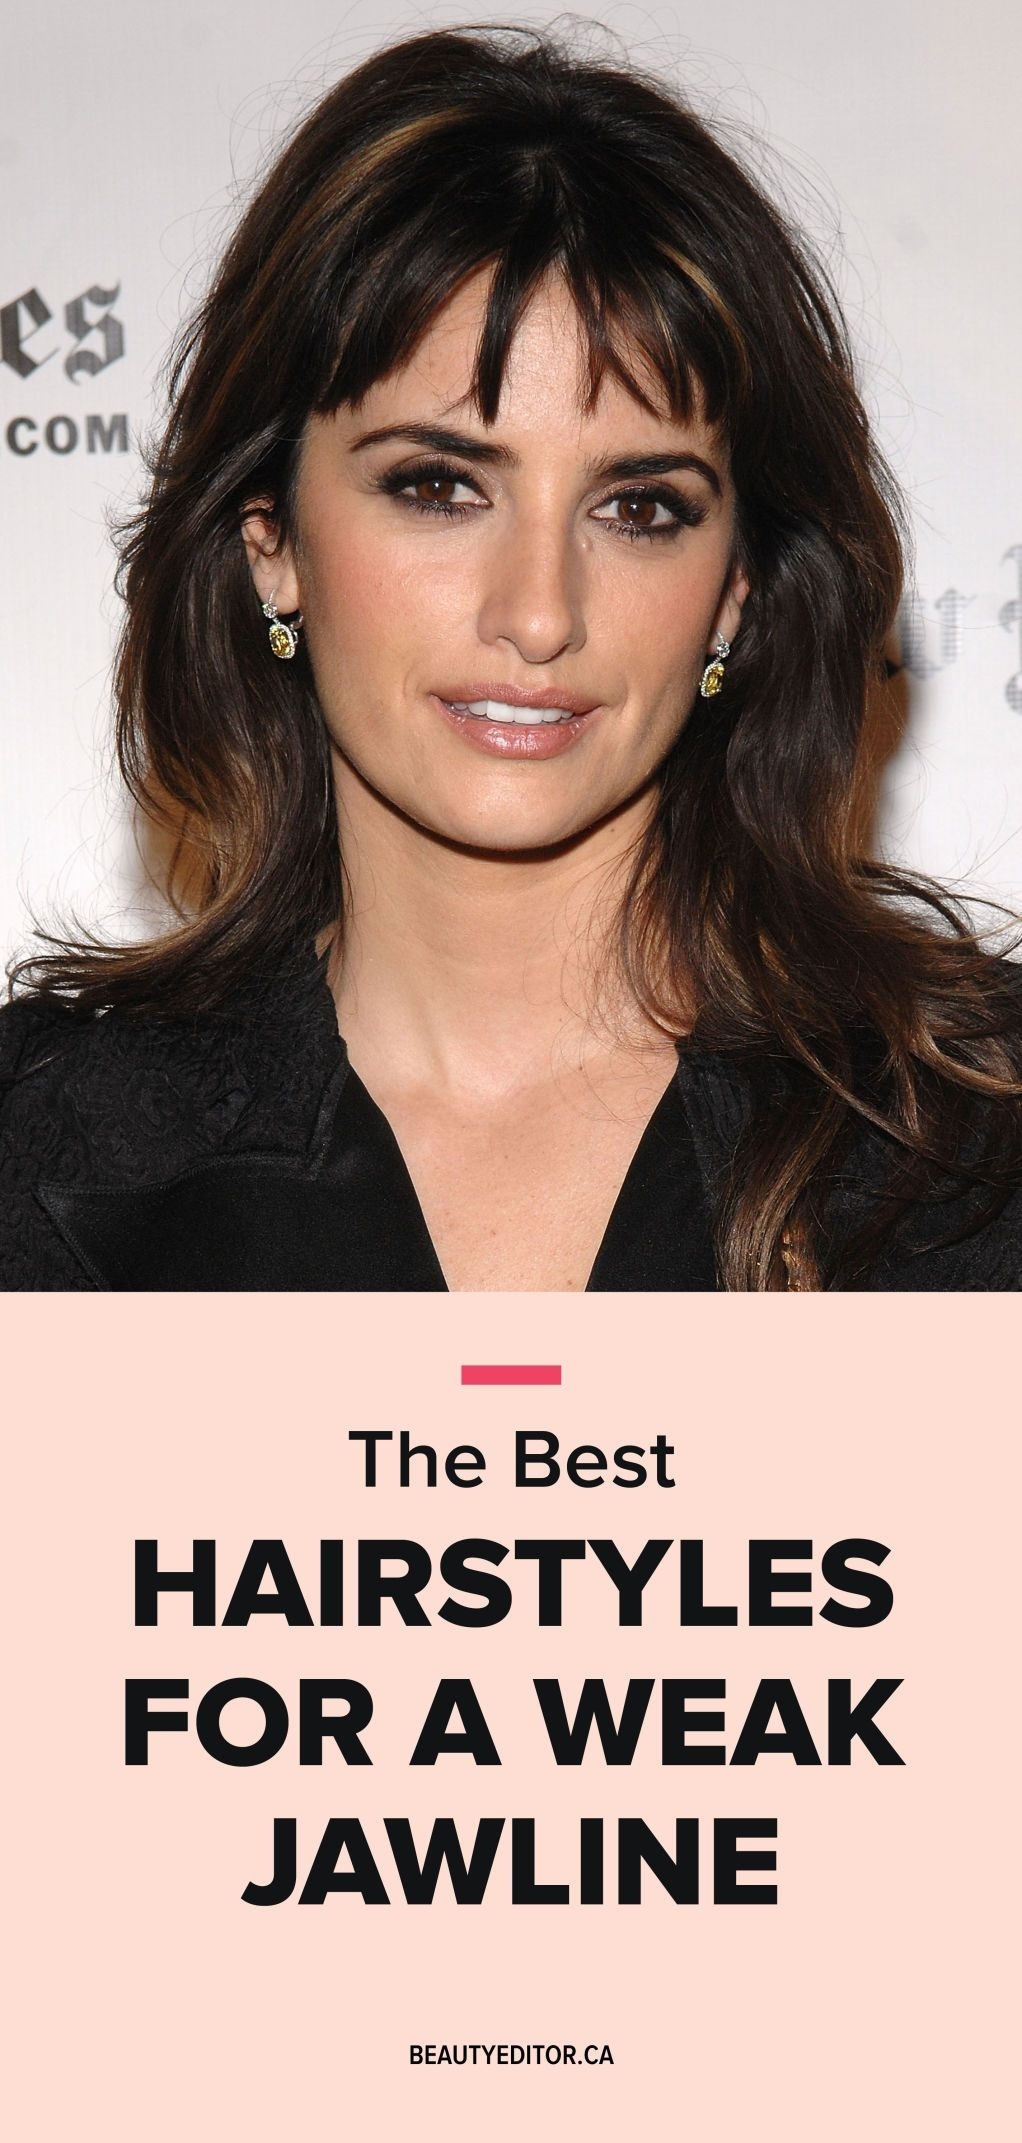 The Best Hairstyles For A Weak Jawline | Hair, Beauty inside Bob Hairstyles For Weak Chin